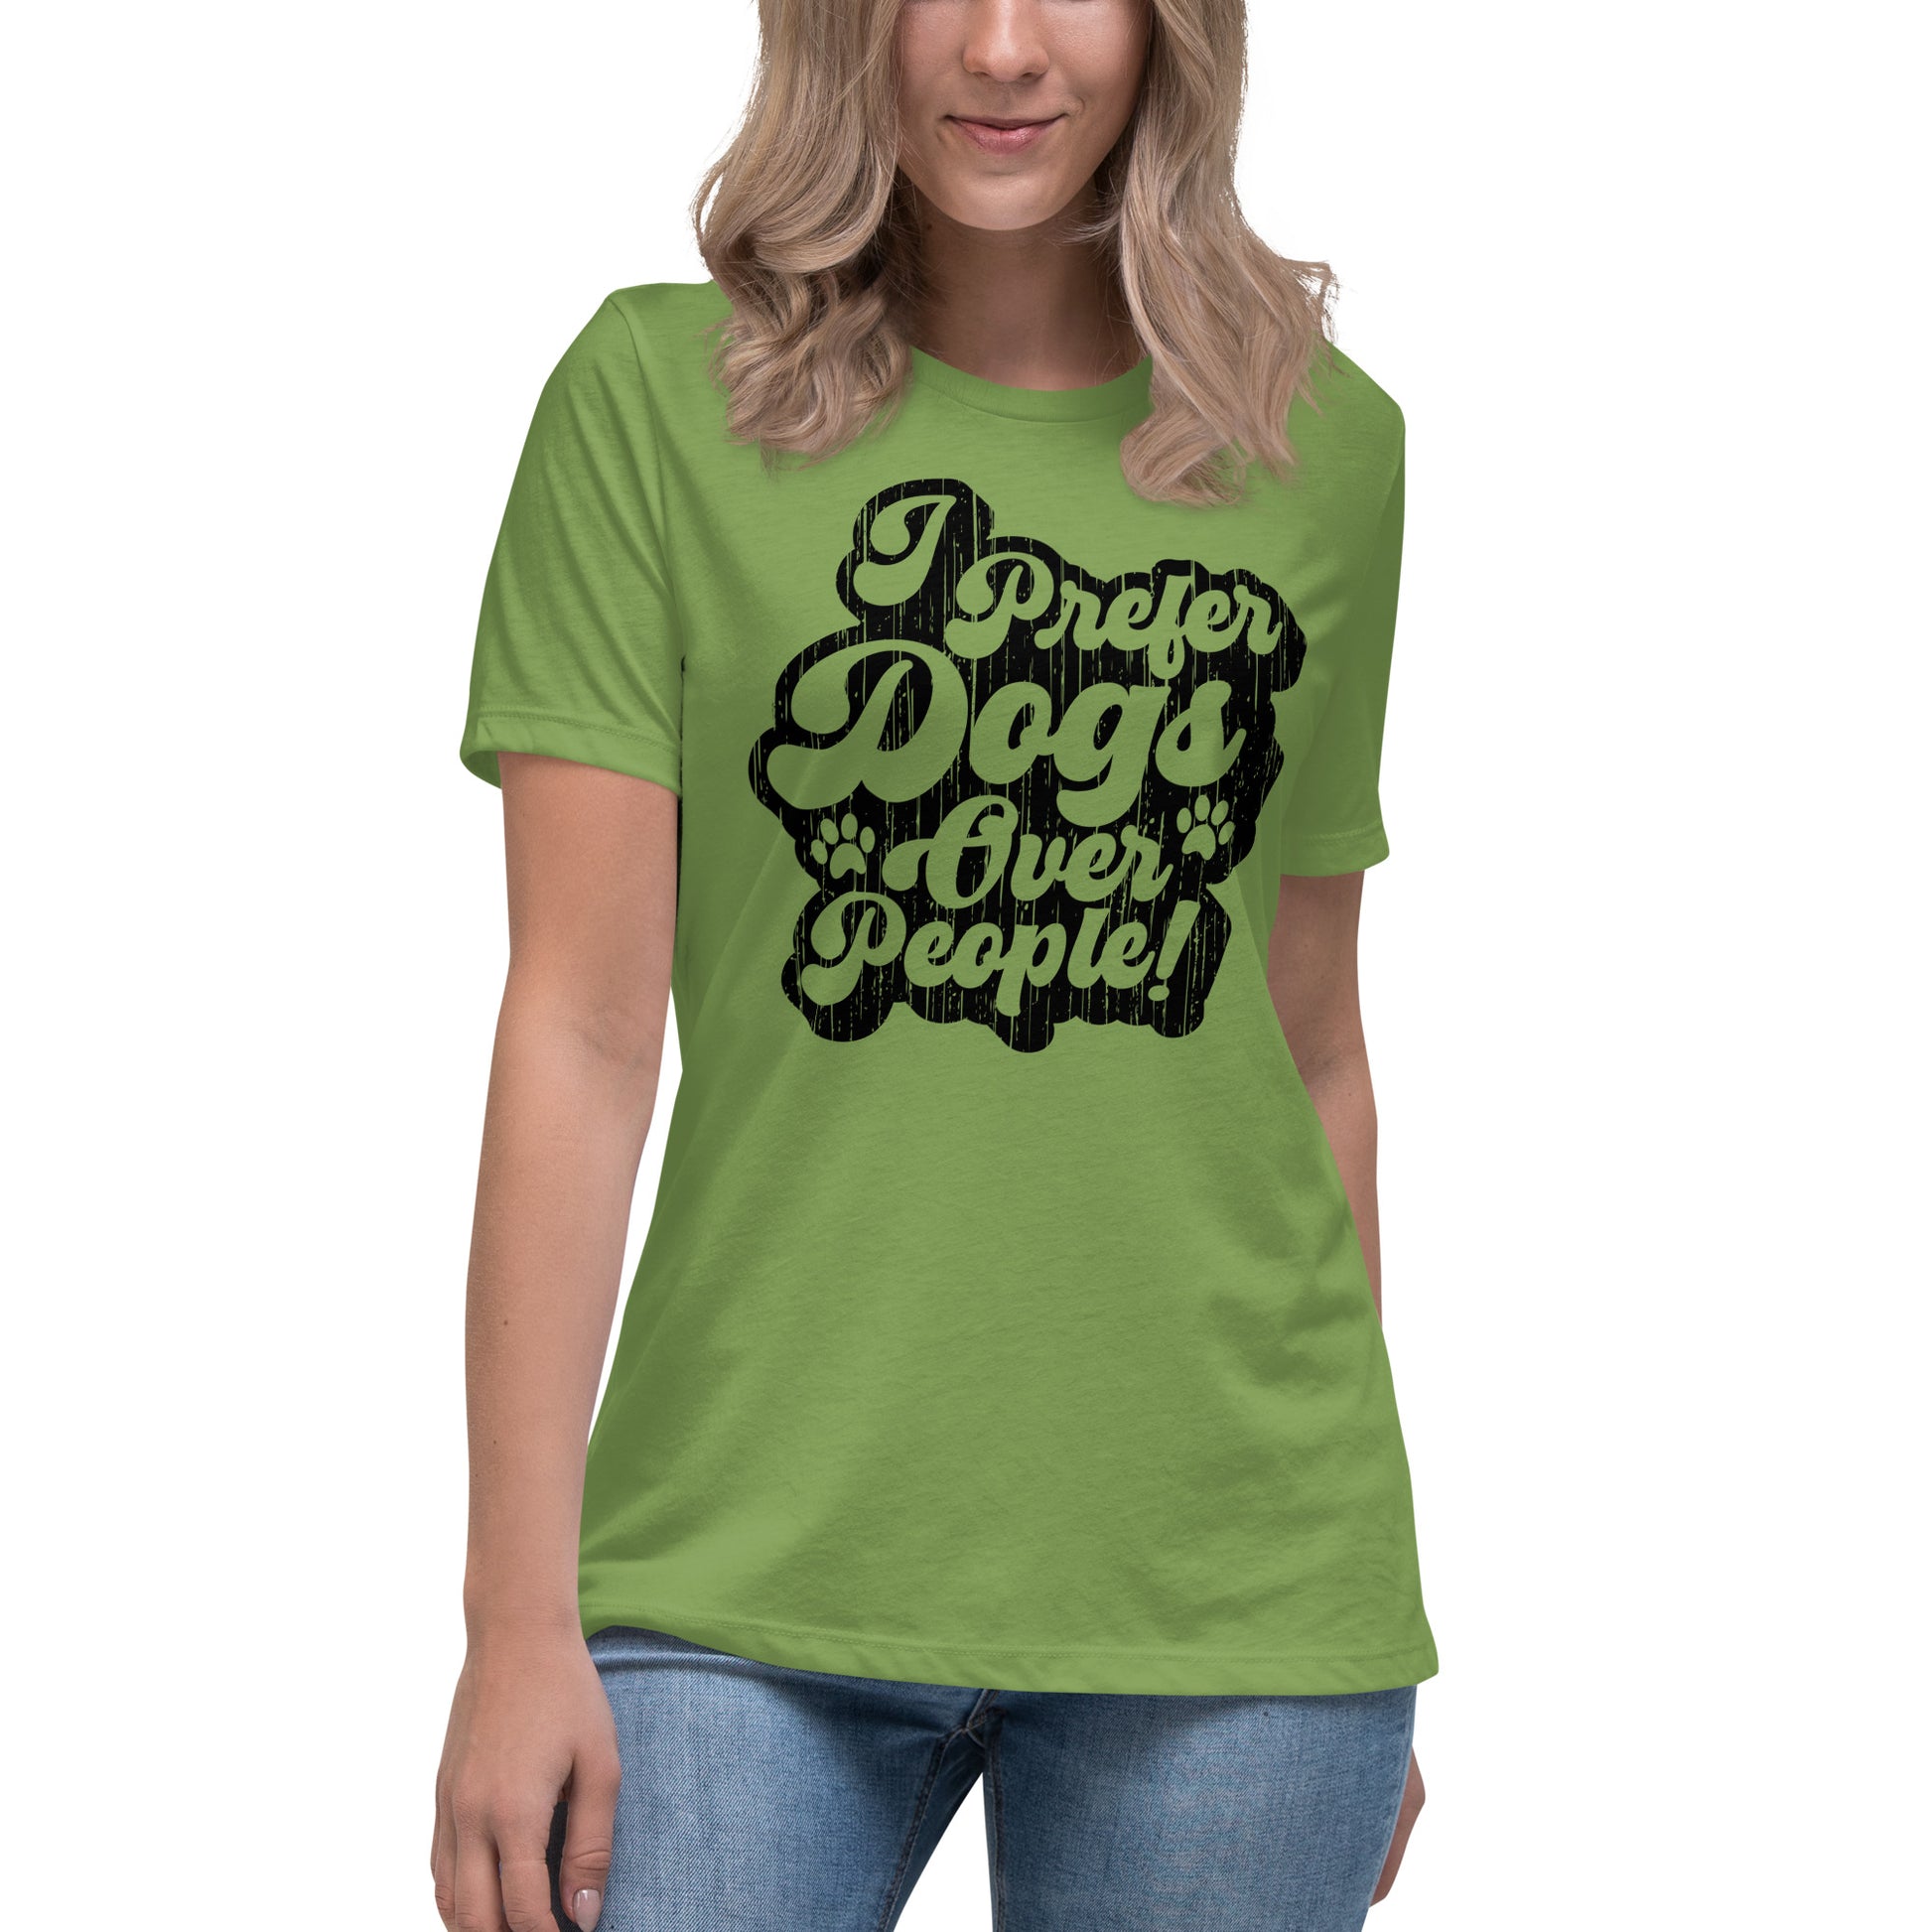 I prefer dogs over people women’s relaxed fit t-shirts by Dog Artistry leaf color